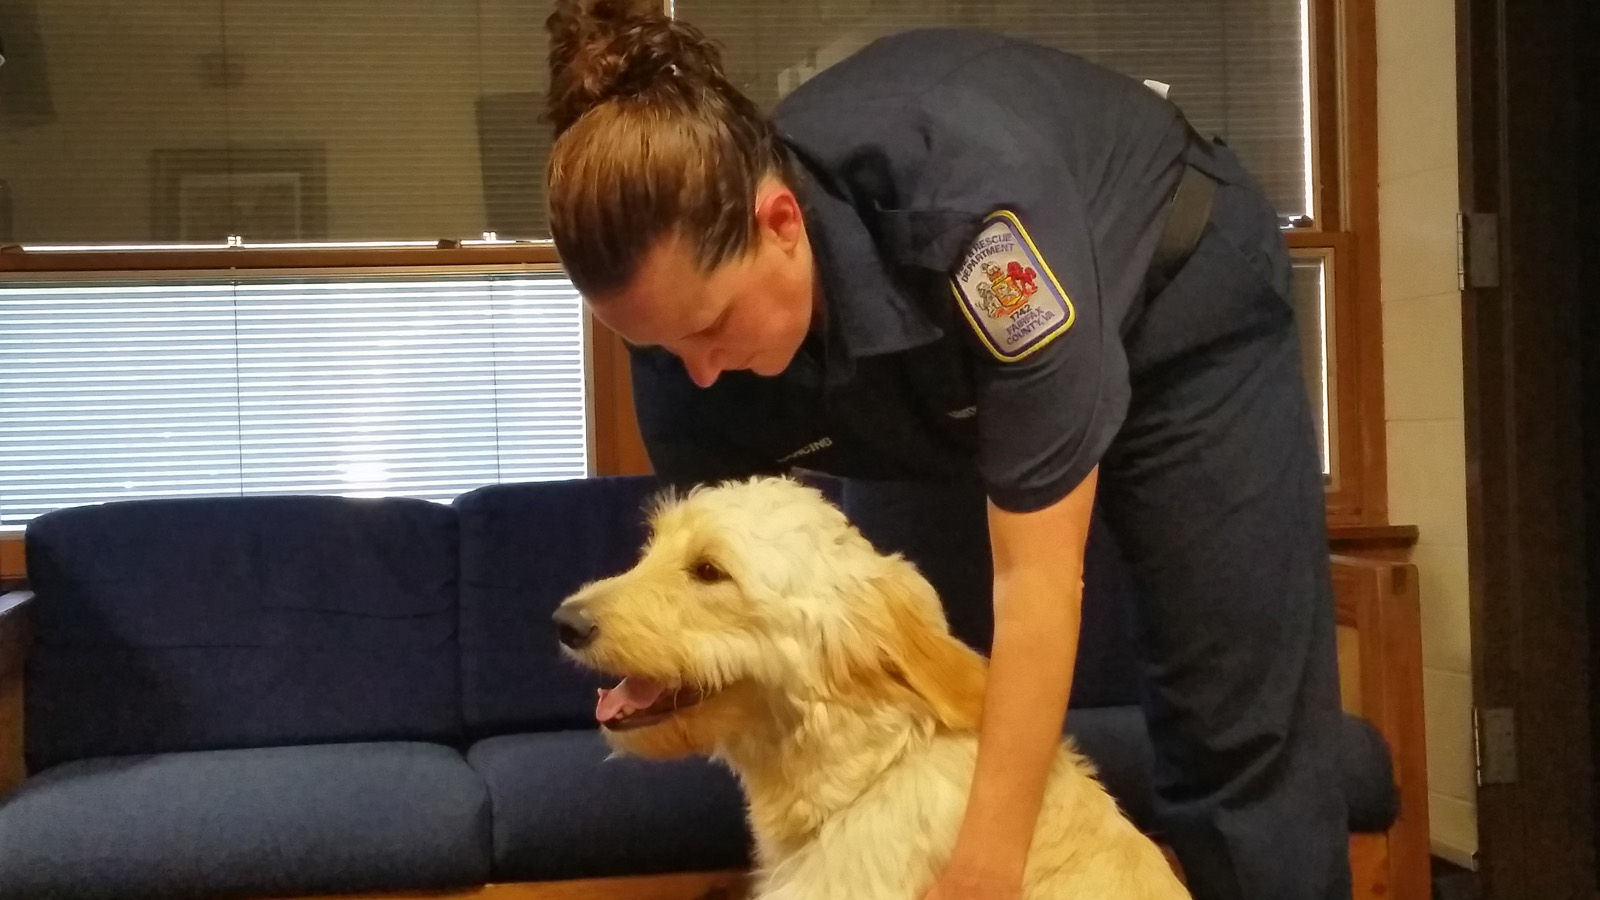 Wally is one of the few dogs in the D.C. area that lives at a fire station 24/7, 365 days a year said Chief Bailey. (WTOP/Kathy Stewart)